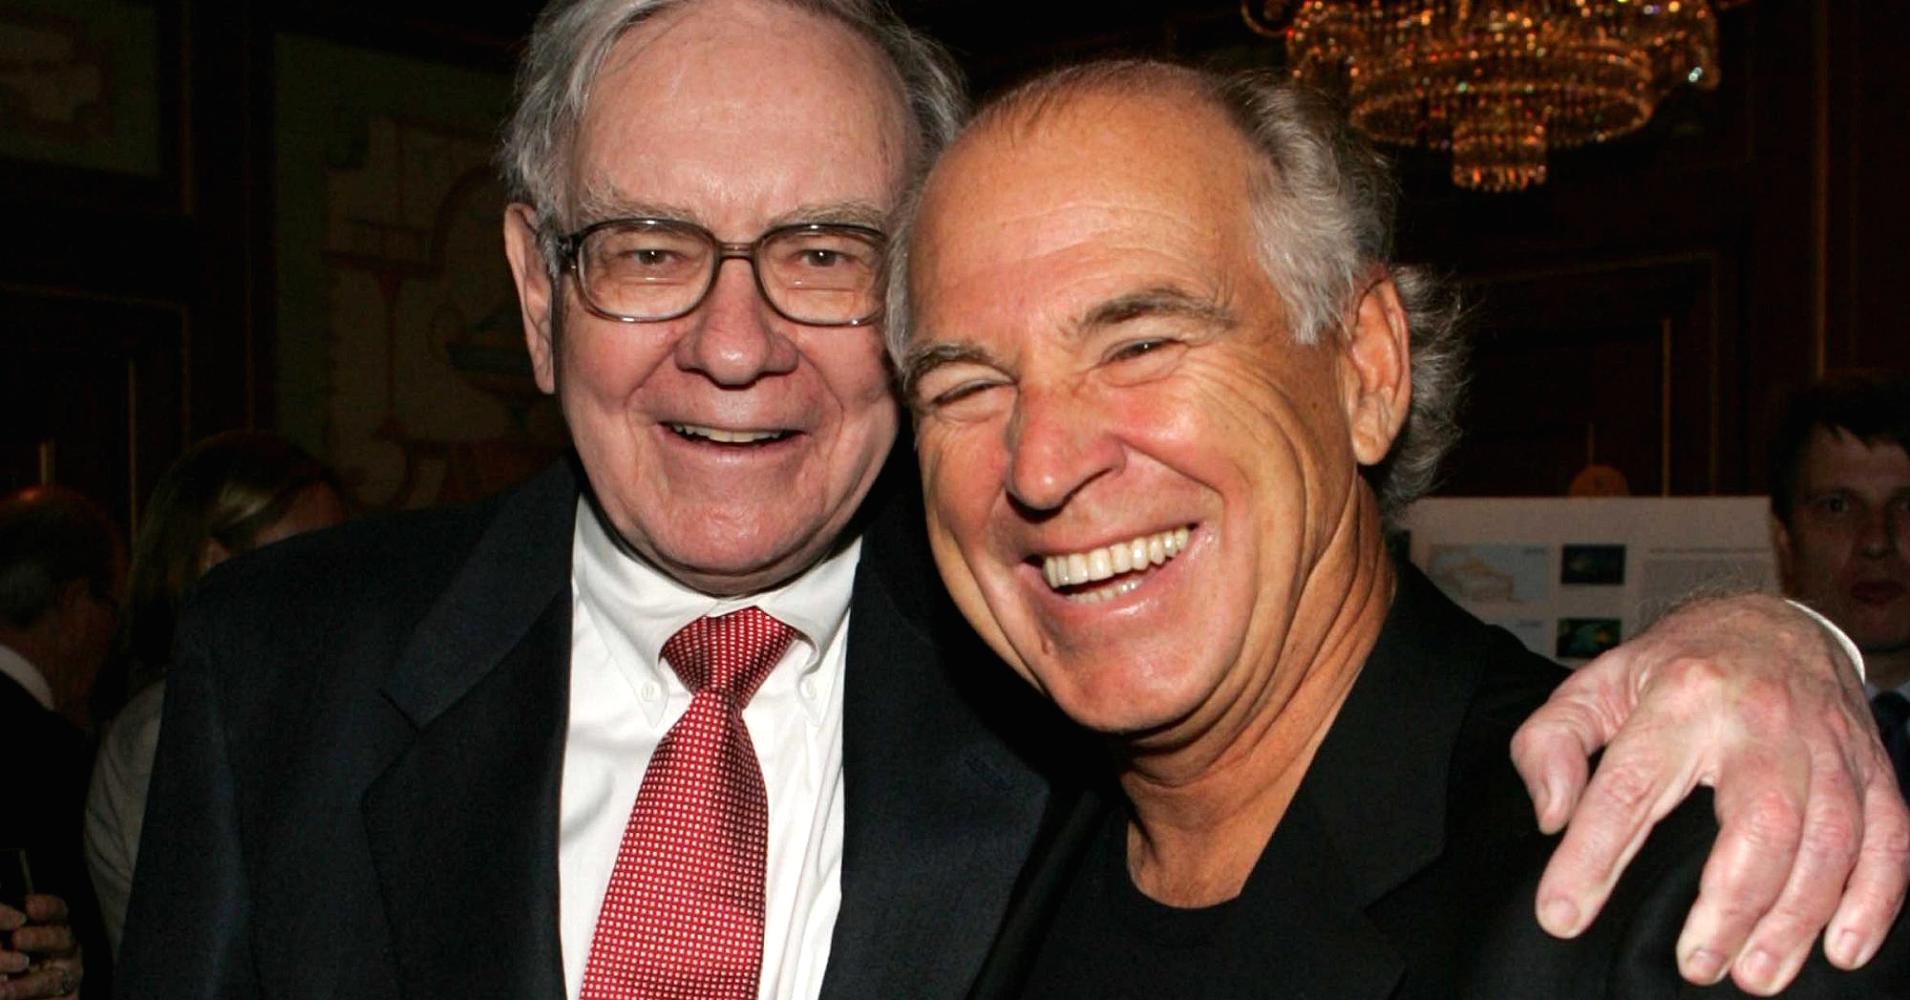 Jimmy Buffett and Warren Buffett Take A DNA Test To Find Out If They Are Related